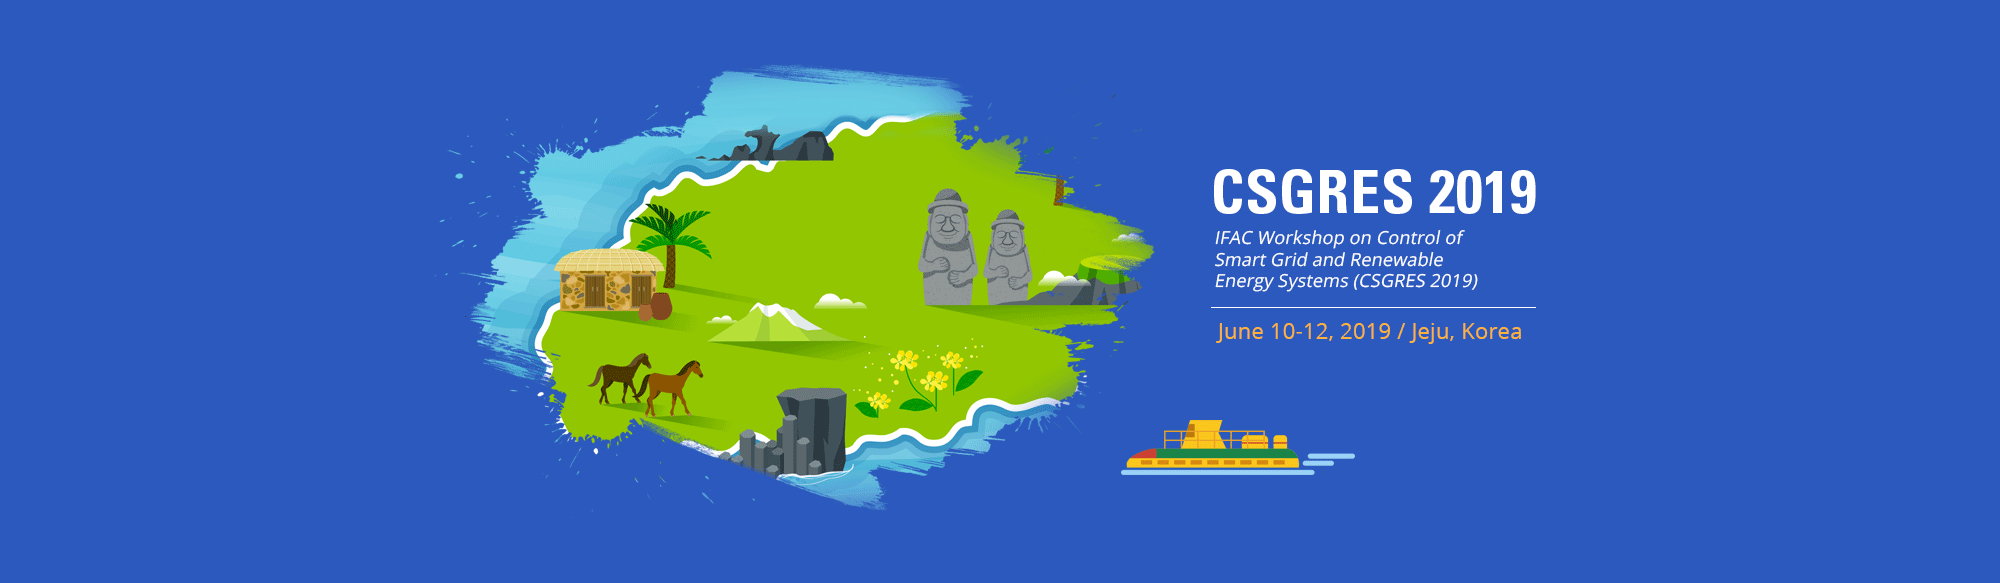 Control of Smart Grid and Renewable Energy Systems - CSGRES 2019™